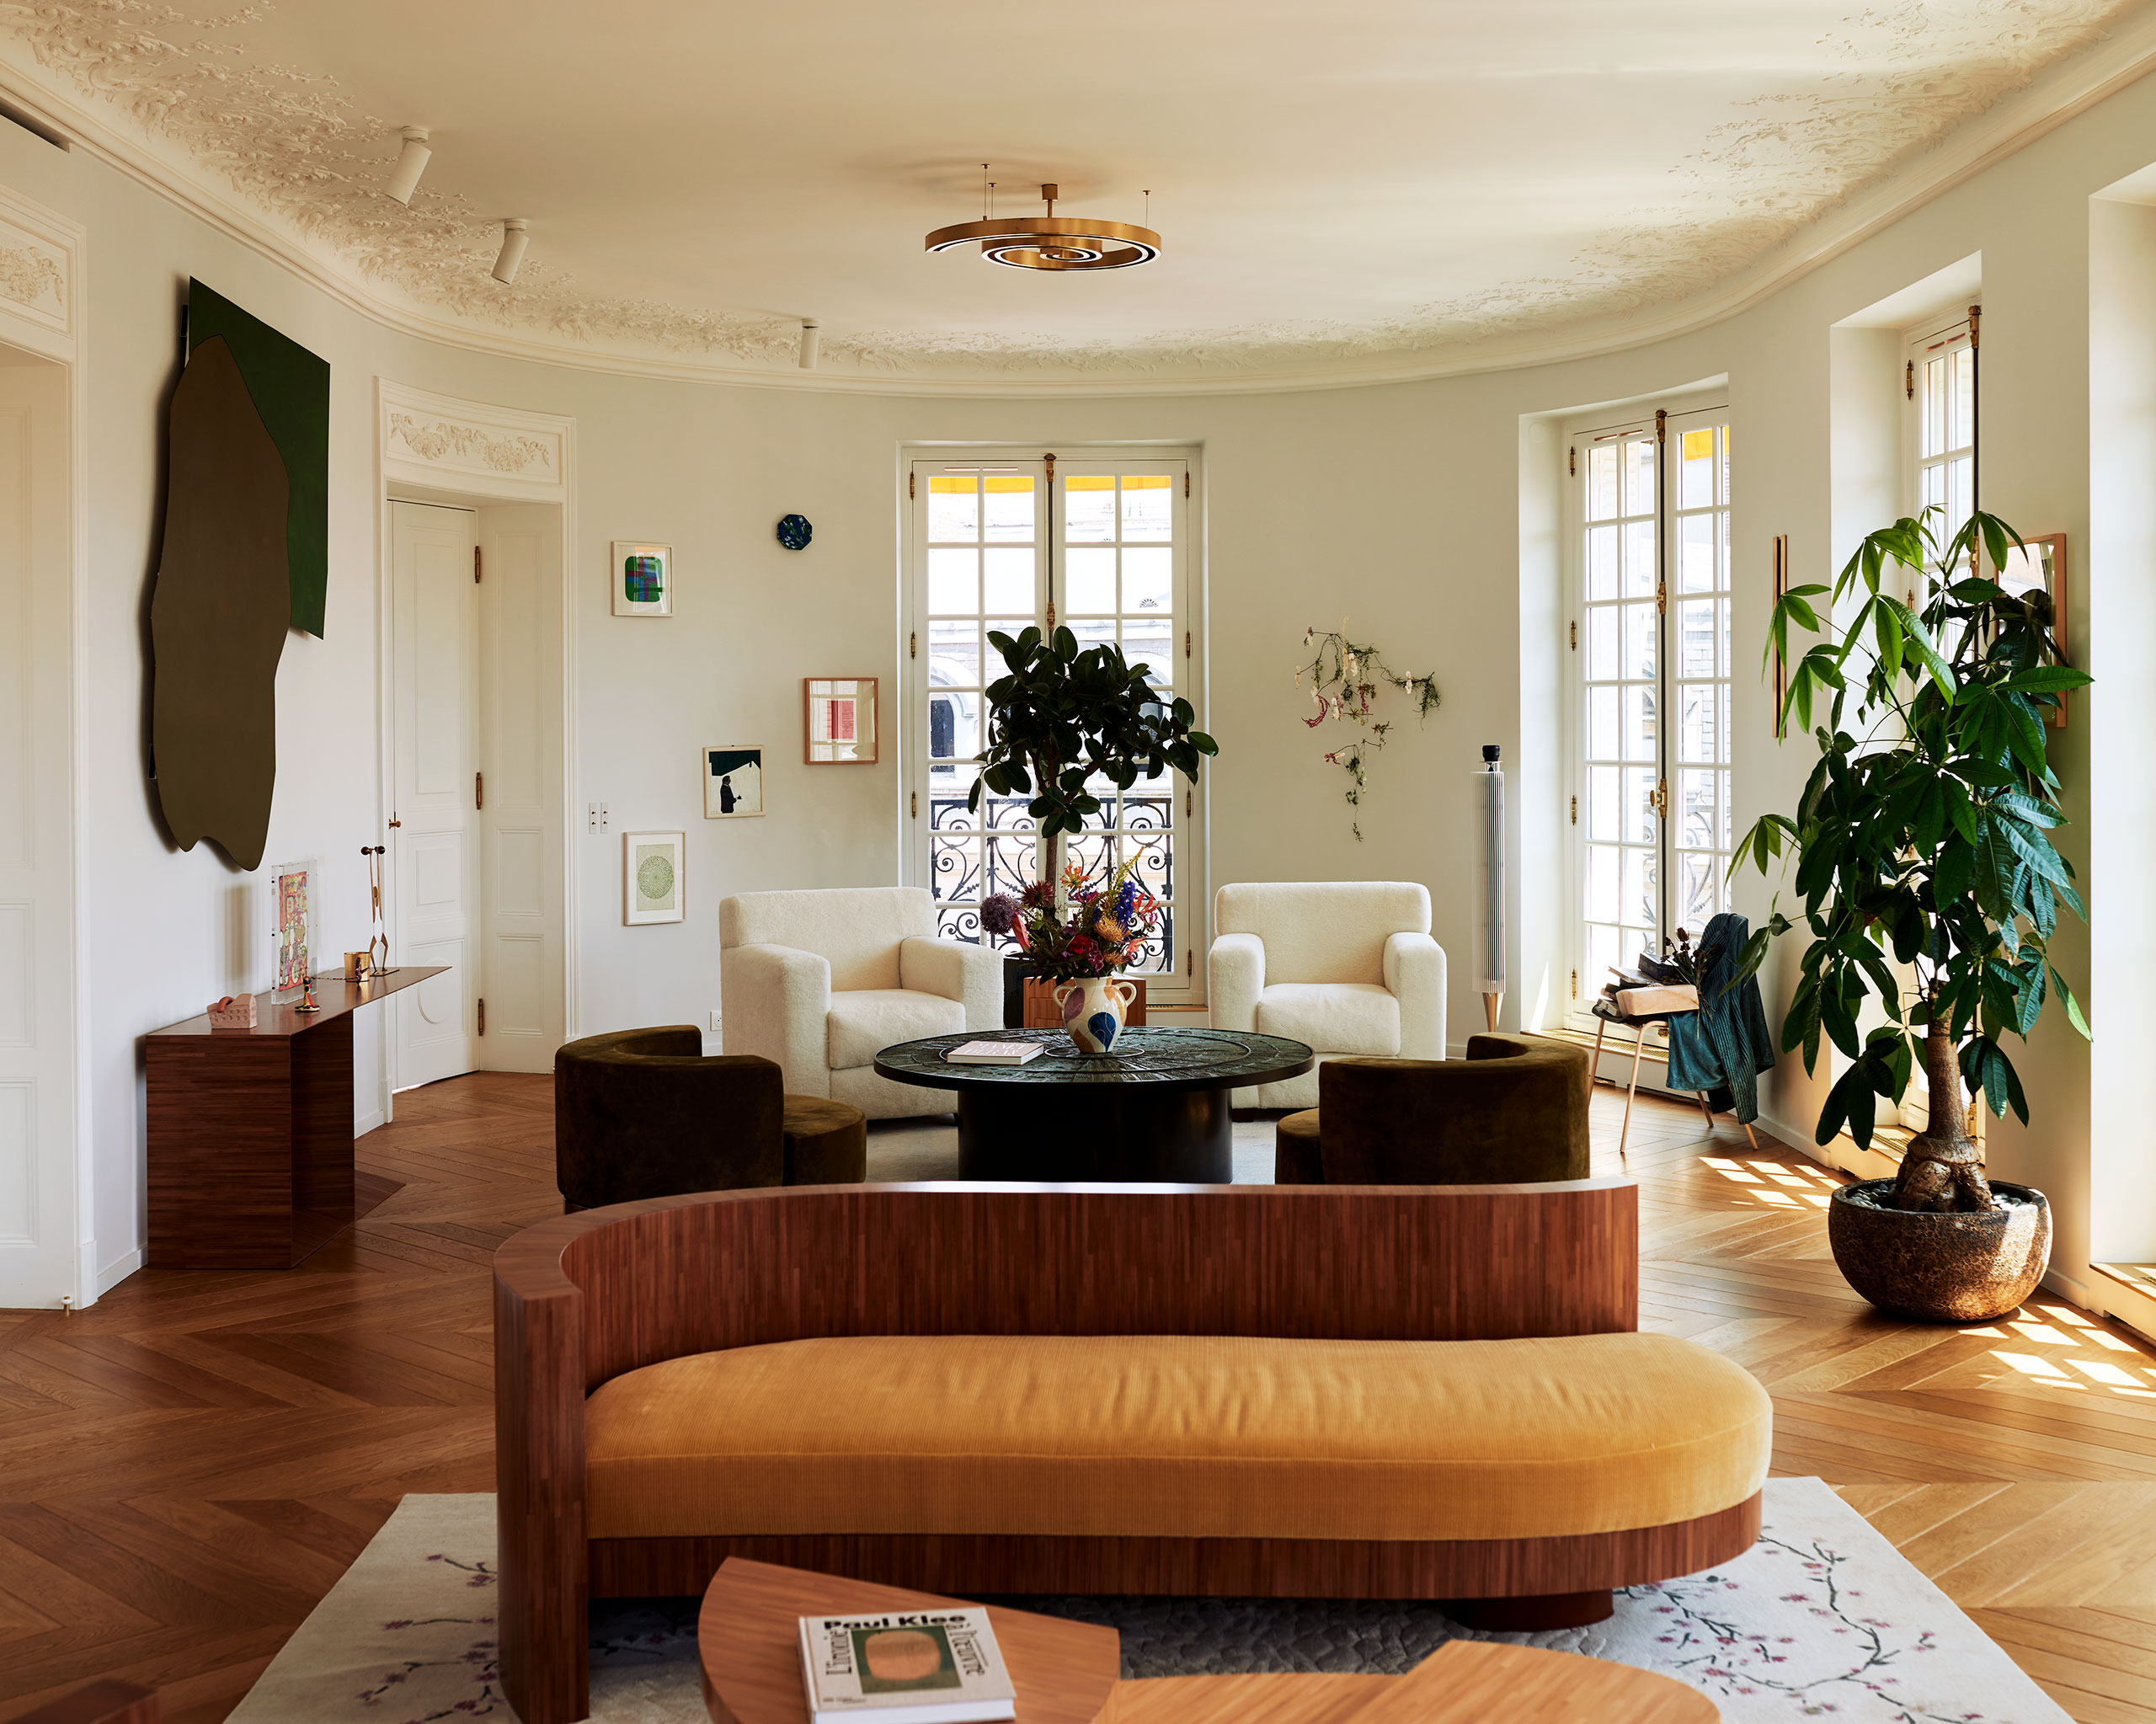 Sofa (foreground) and console (left) by Richard Peduzzi; Artwork above console by Imi Knobel; Vintage round armchairs; White armchairs by Jean-Michel Franck; Sculpture on wall by Bianca Bondi; Chair sculpture (right) by Tatjana Trouvé from Guardian series.
Photography by Francois Coquerel.